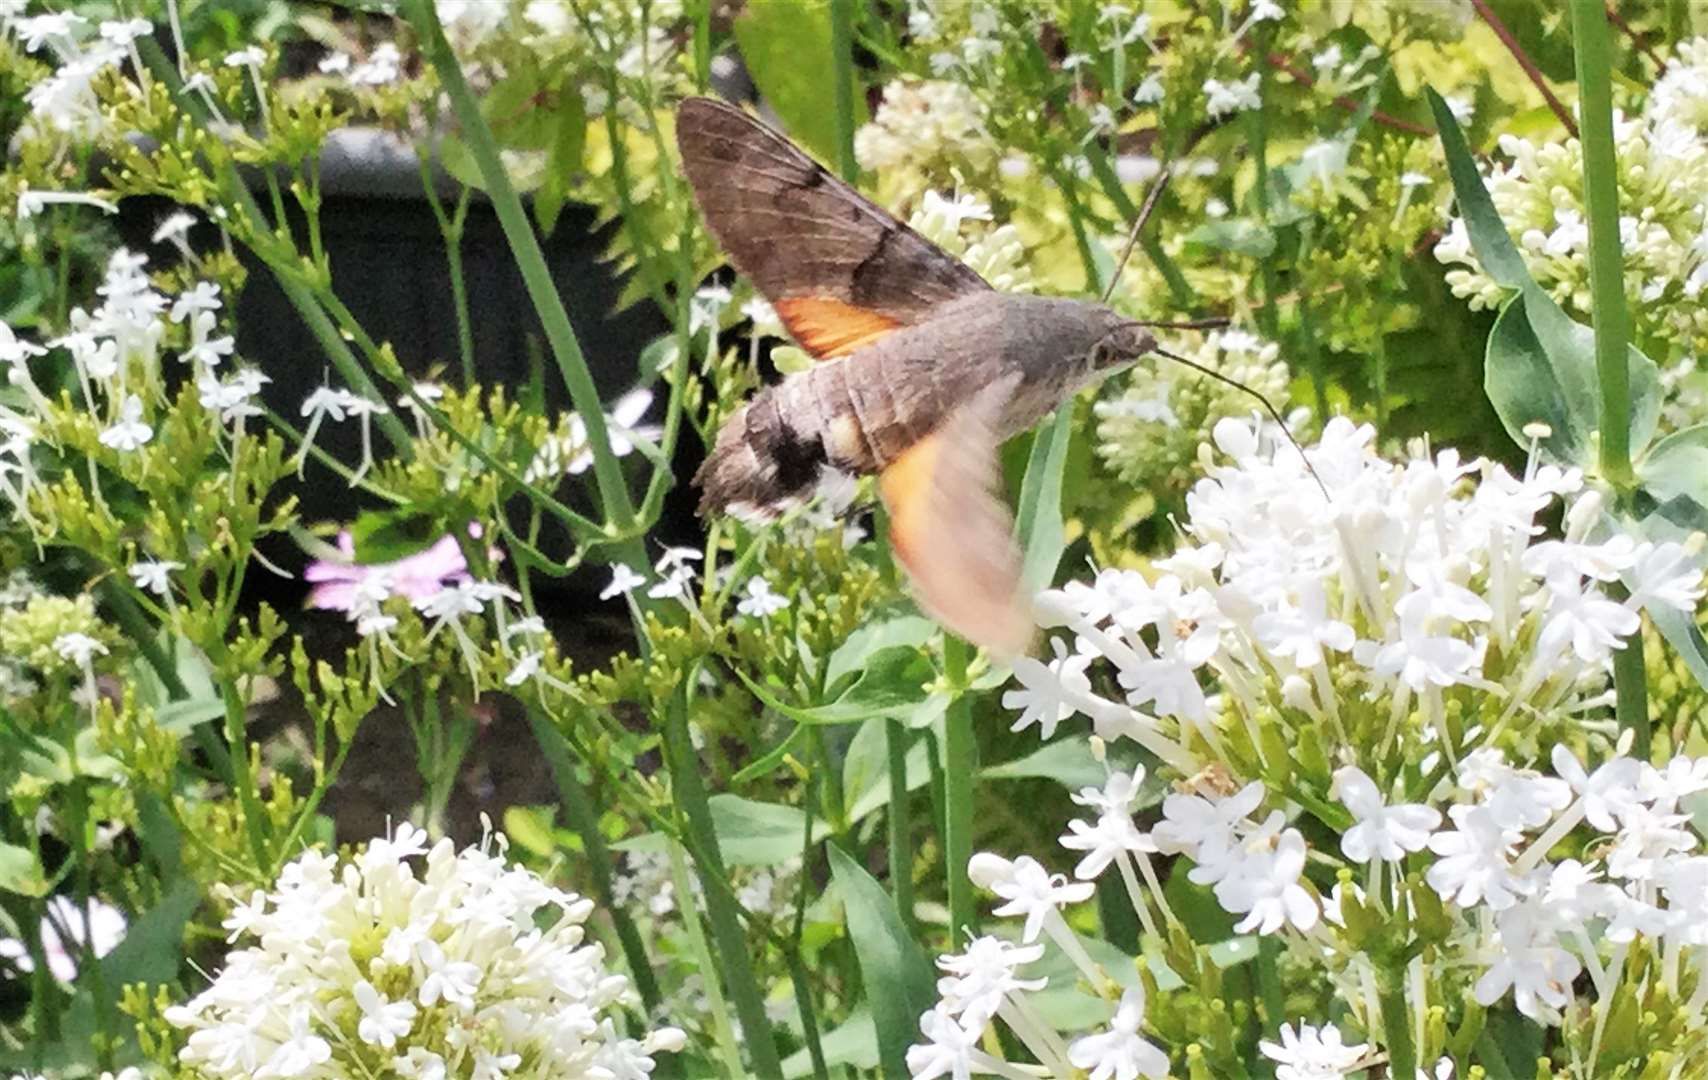 Steven Buttress thought it was a small bird at first. The moth fed on valerian plants in his garden. Picture: Steven Buttress